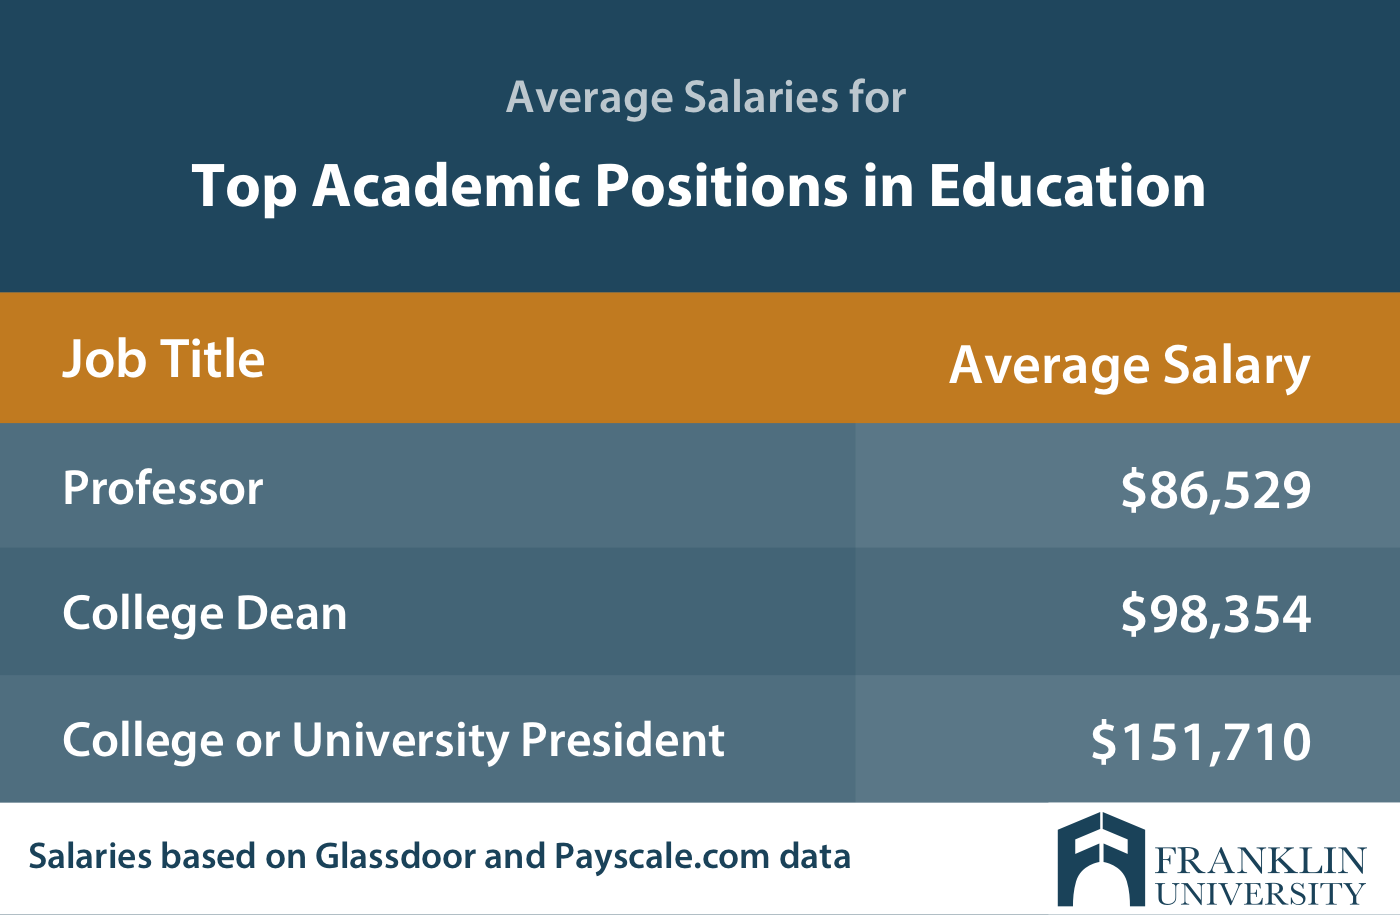 graphic describing the average salaries for top academic positions in education